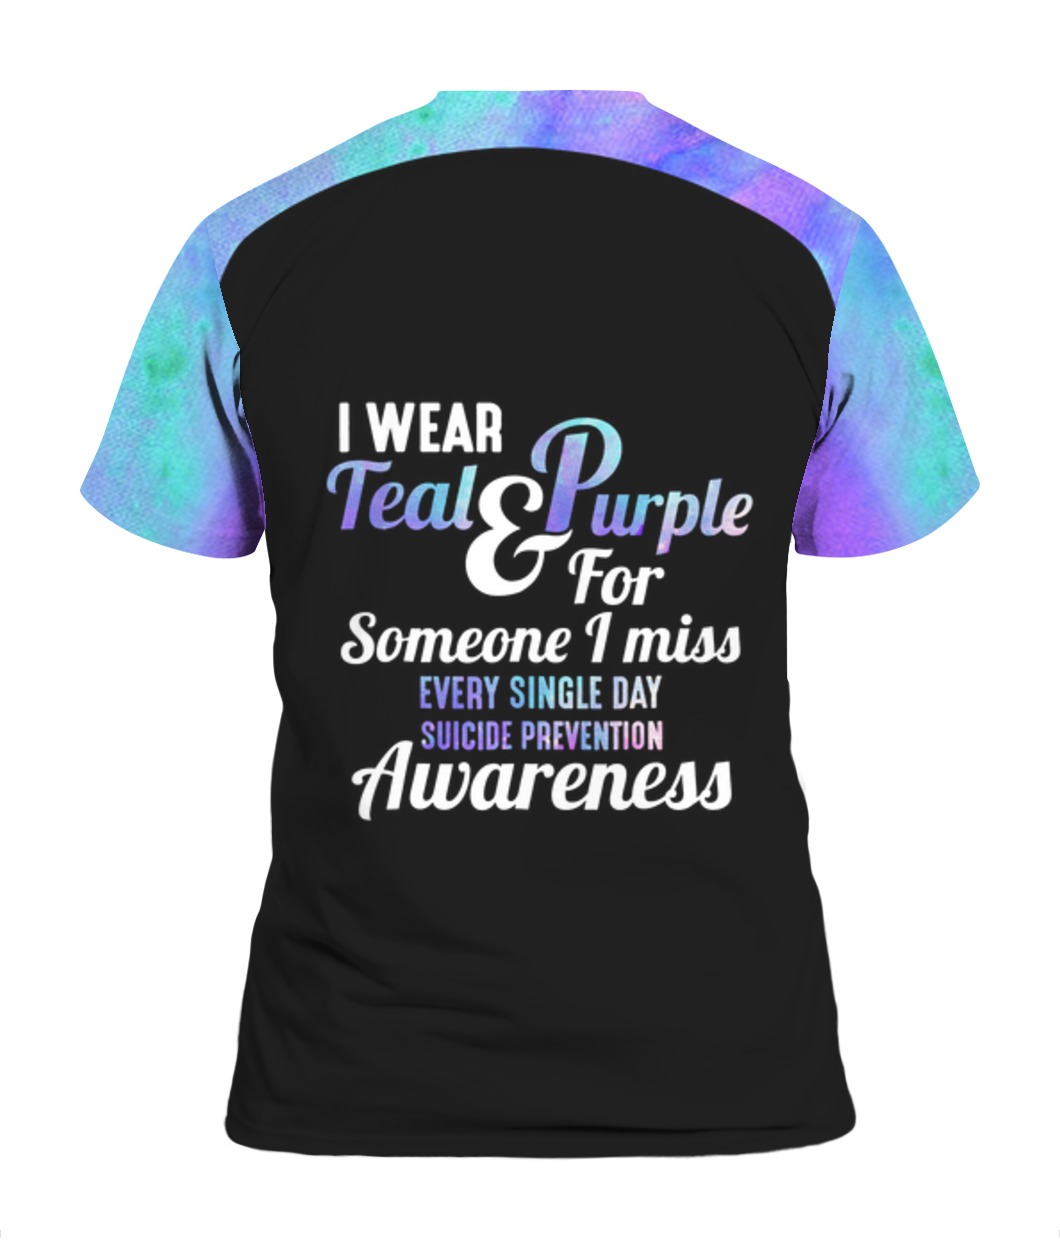 Ribbon suicide prevention awareness teal and purple full printing tshirt - back